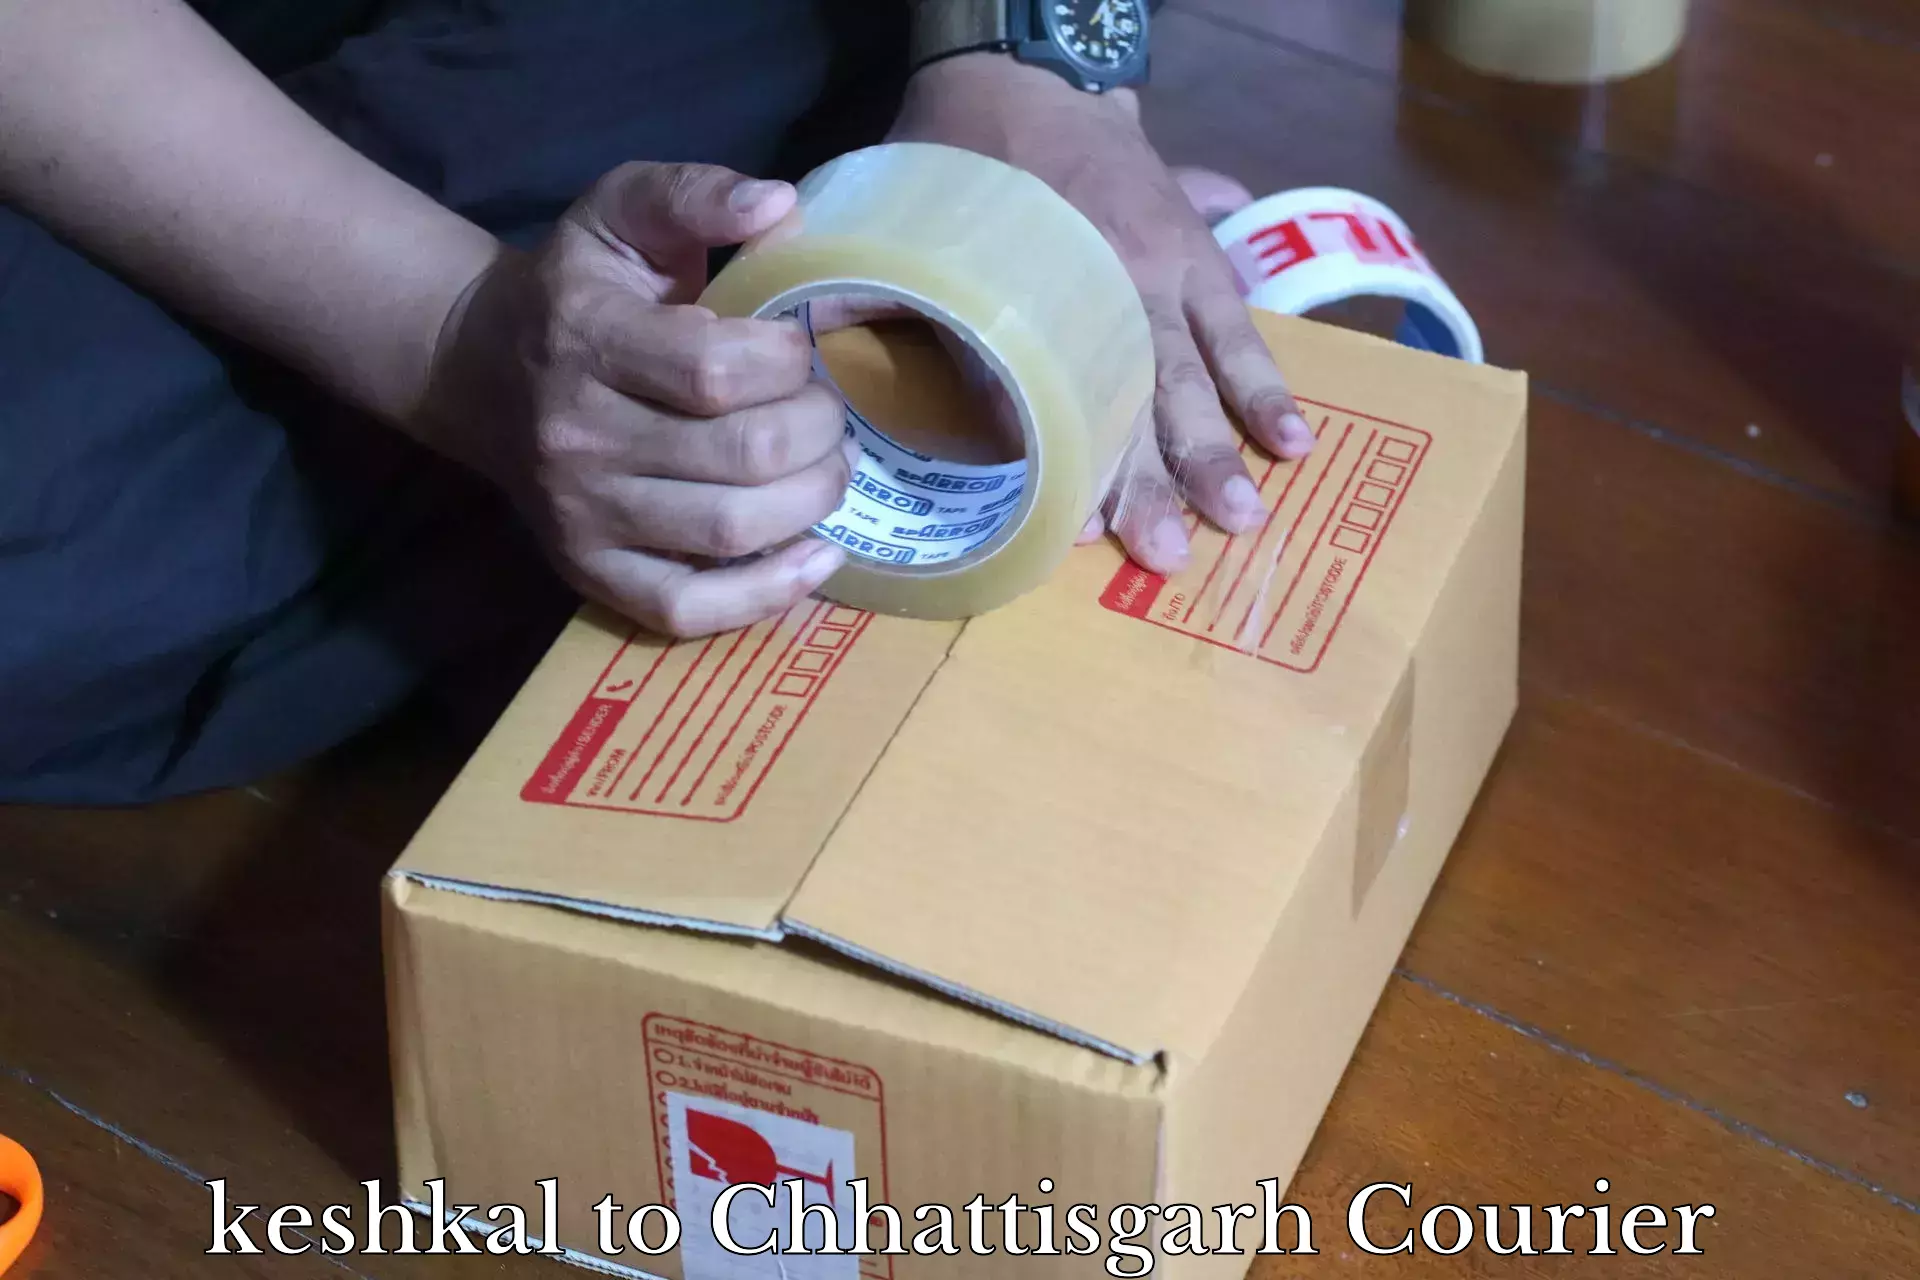 Courier service booking keshkal to Berla